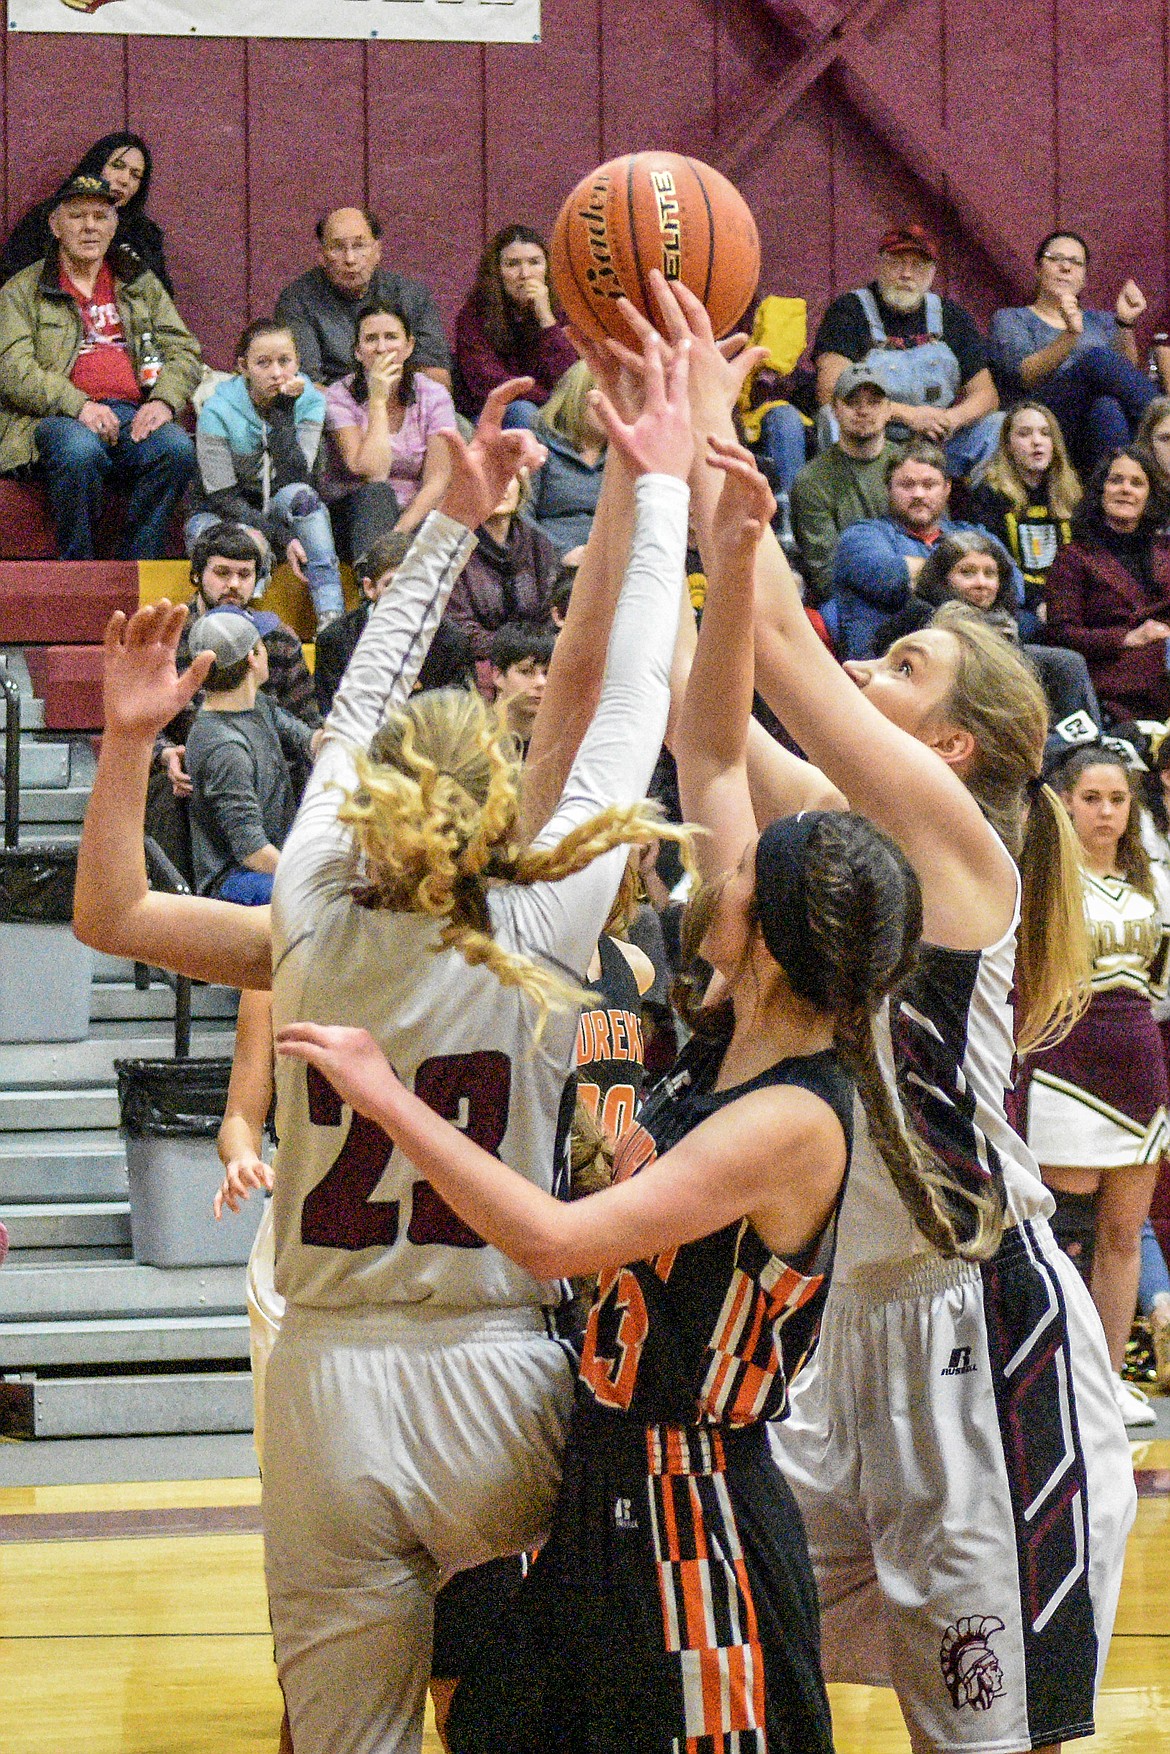 Troy junior Ella Pierce gets the rebound and makes the shot at the buzzer just before halftime against Eureka Saturday. (Ben Kibbey/The Western News)